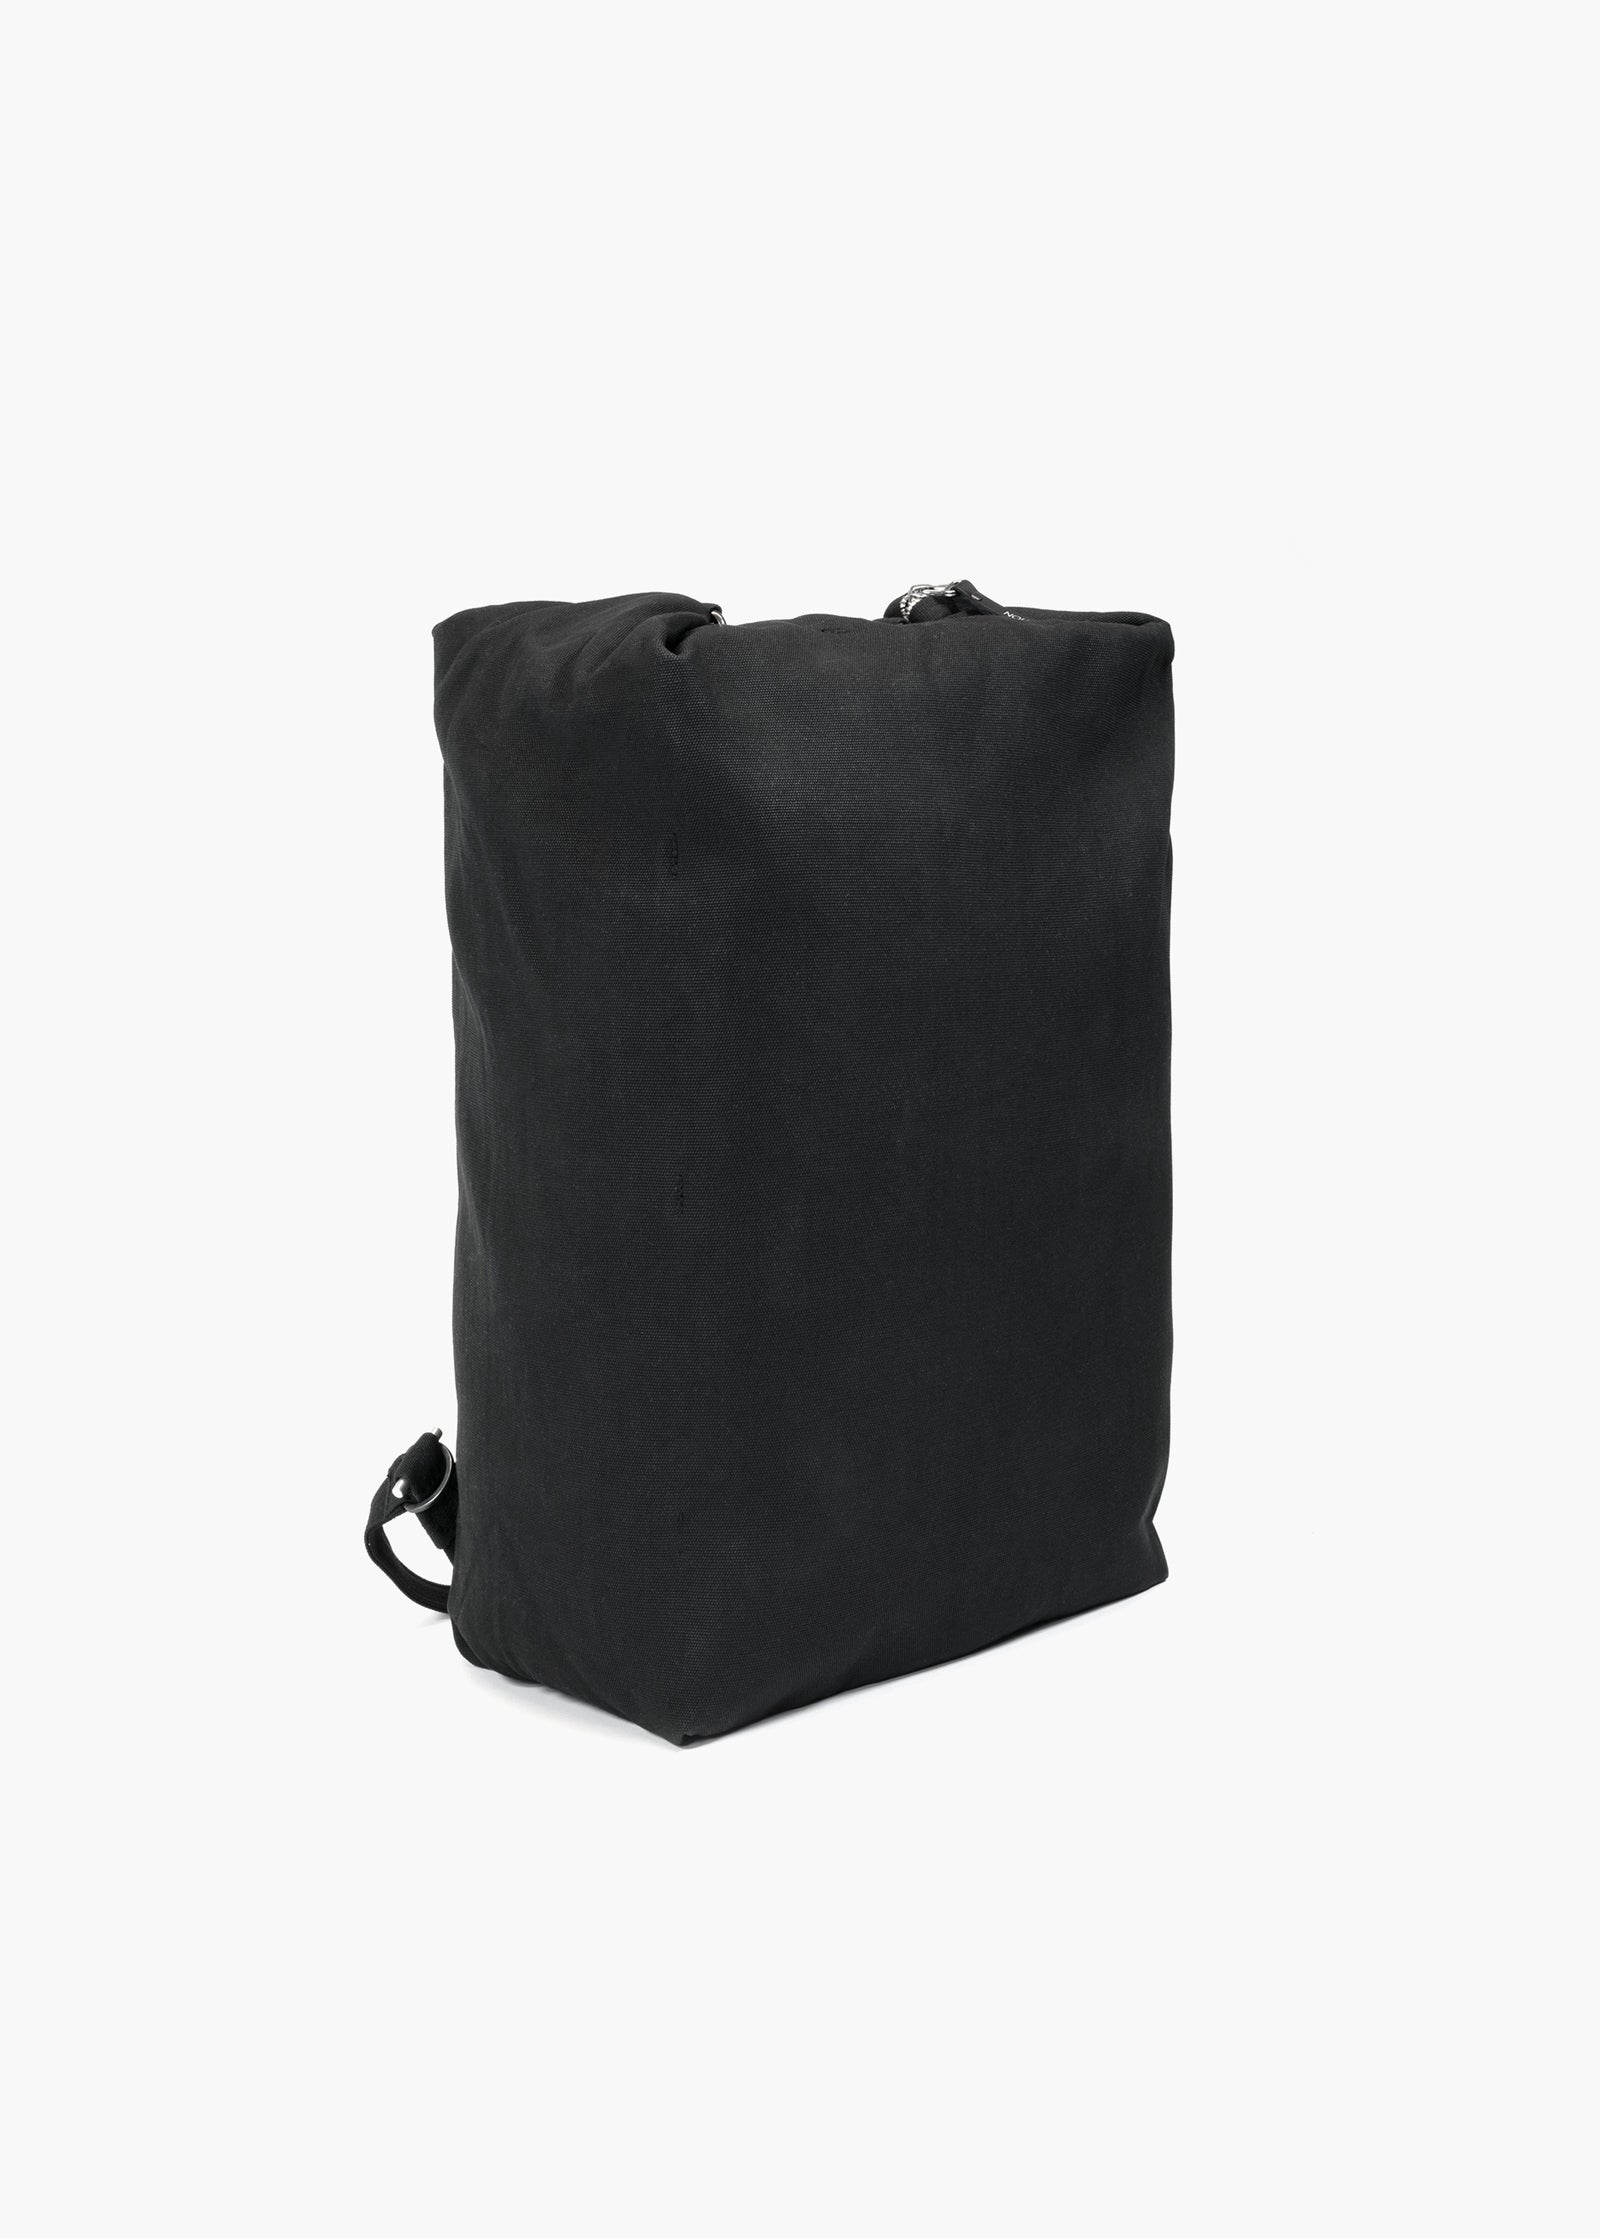 Travel Pack – All Black - QWSTION